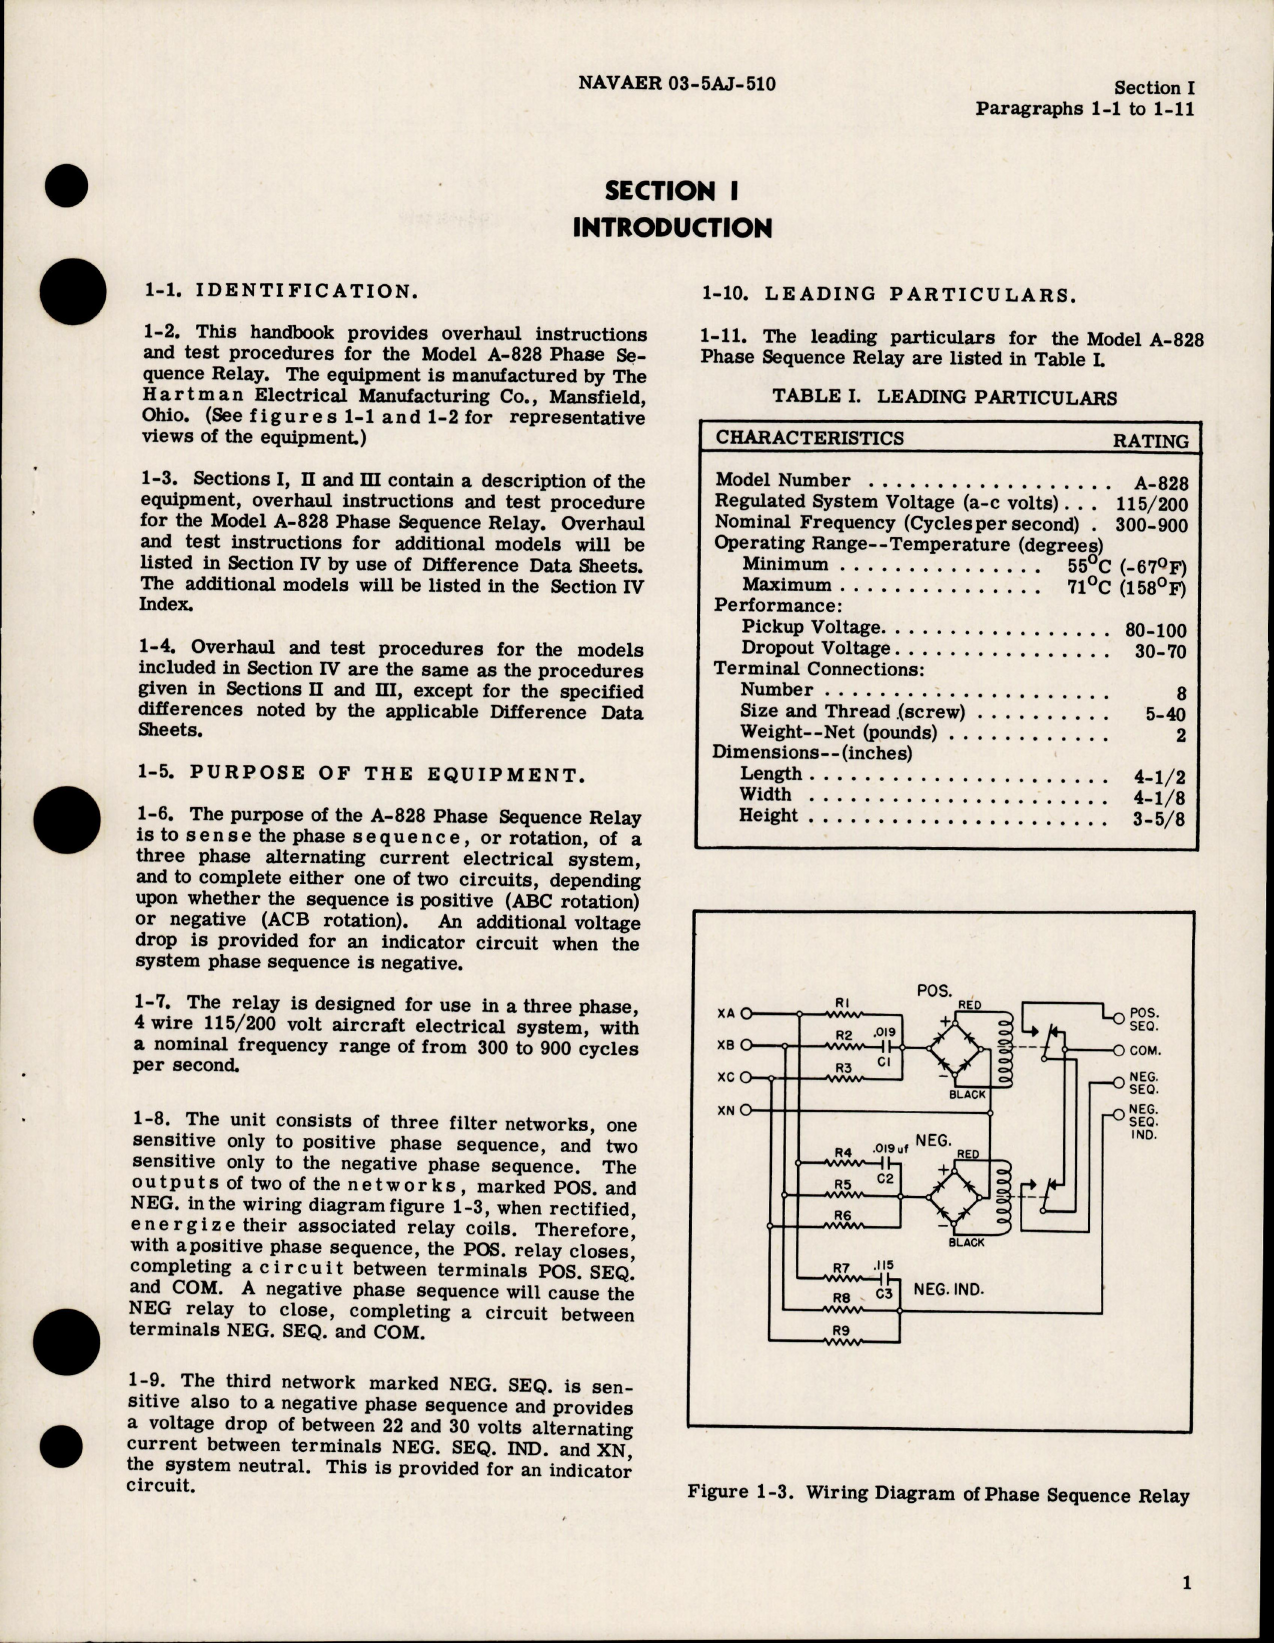 Sample page 5 from AirCorps Library document: Overhaul Instructions for Phase Sequence Relay - Model A-828 